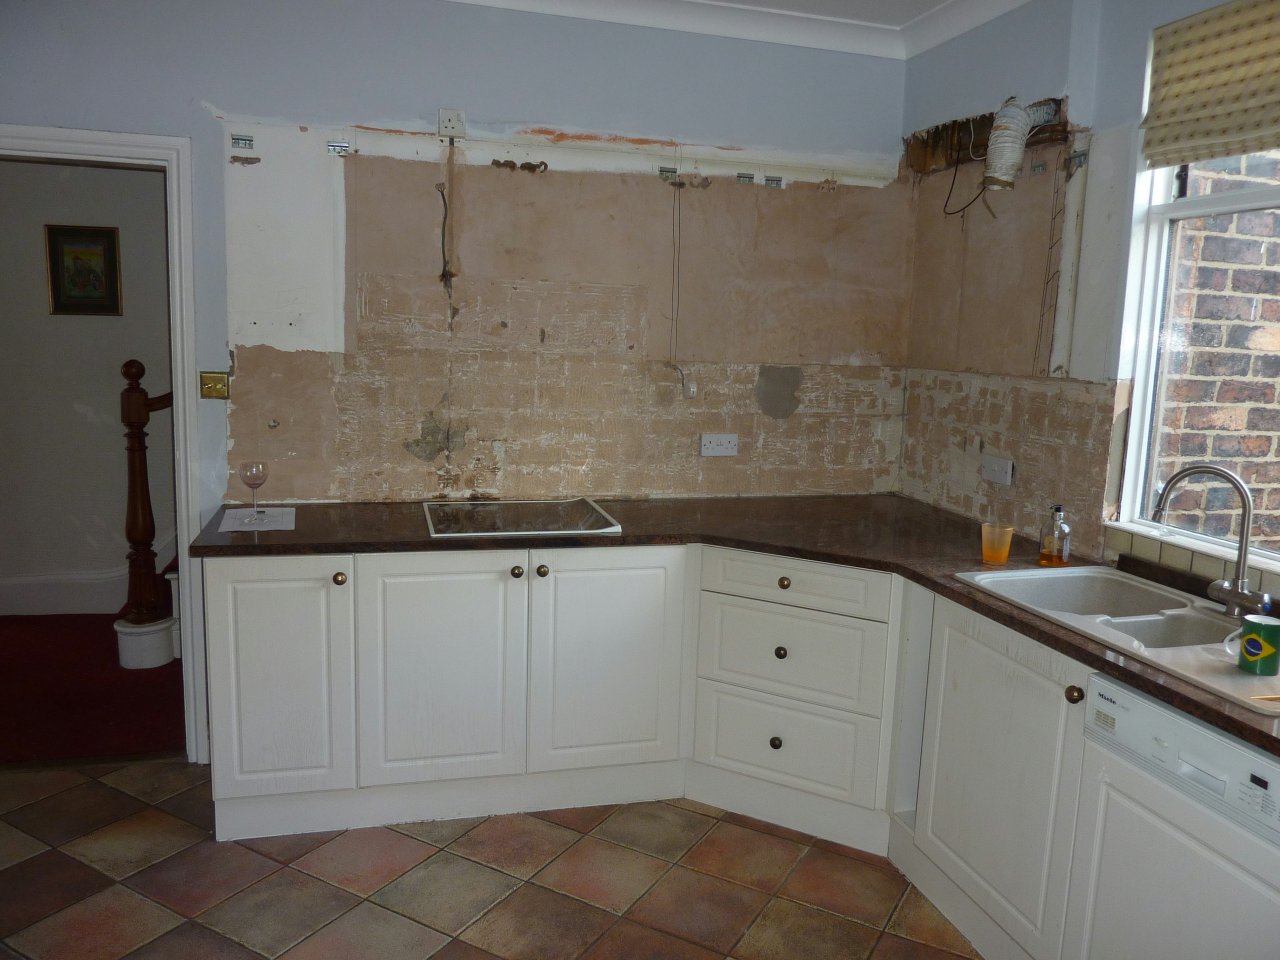 JPEG image - Wall cupboards over the hob removed ...